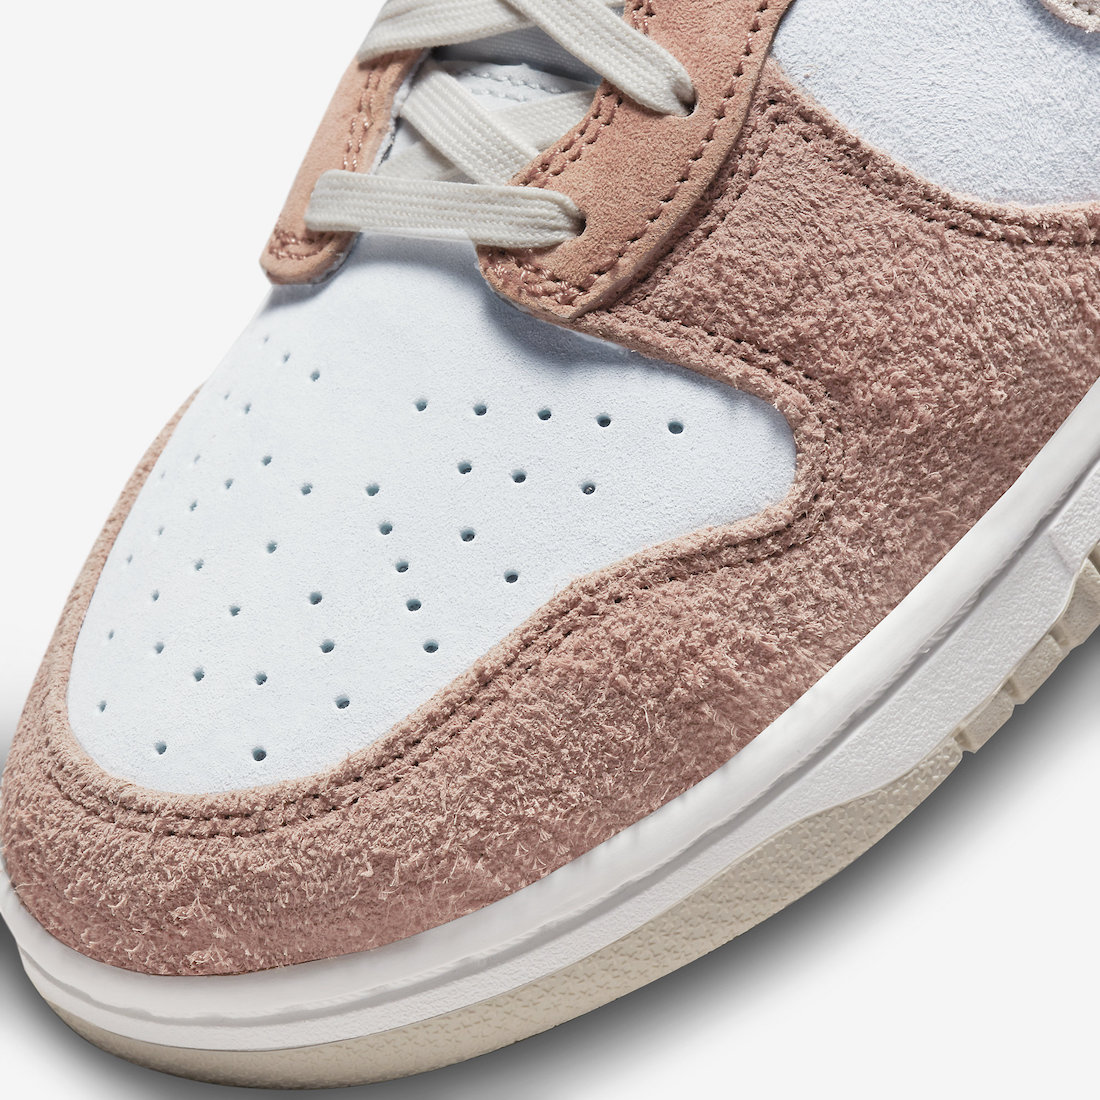 Nike Dunk High Fossil Rose DH7576-400 Release Date